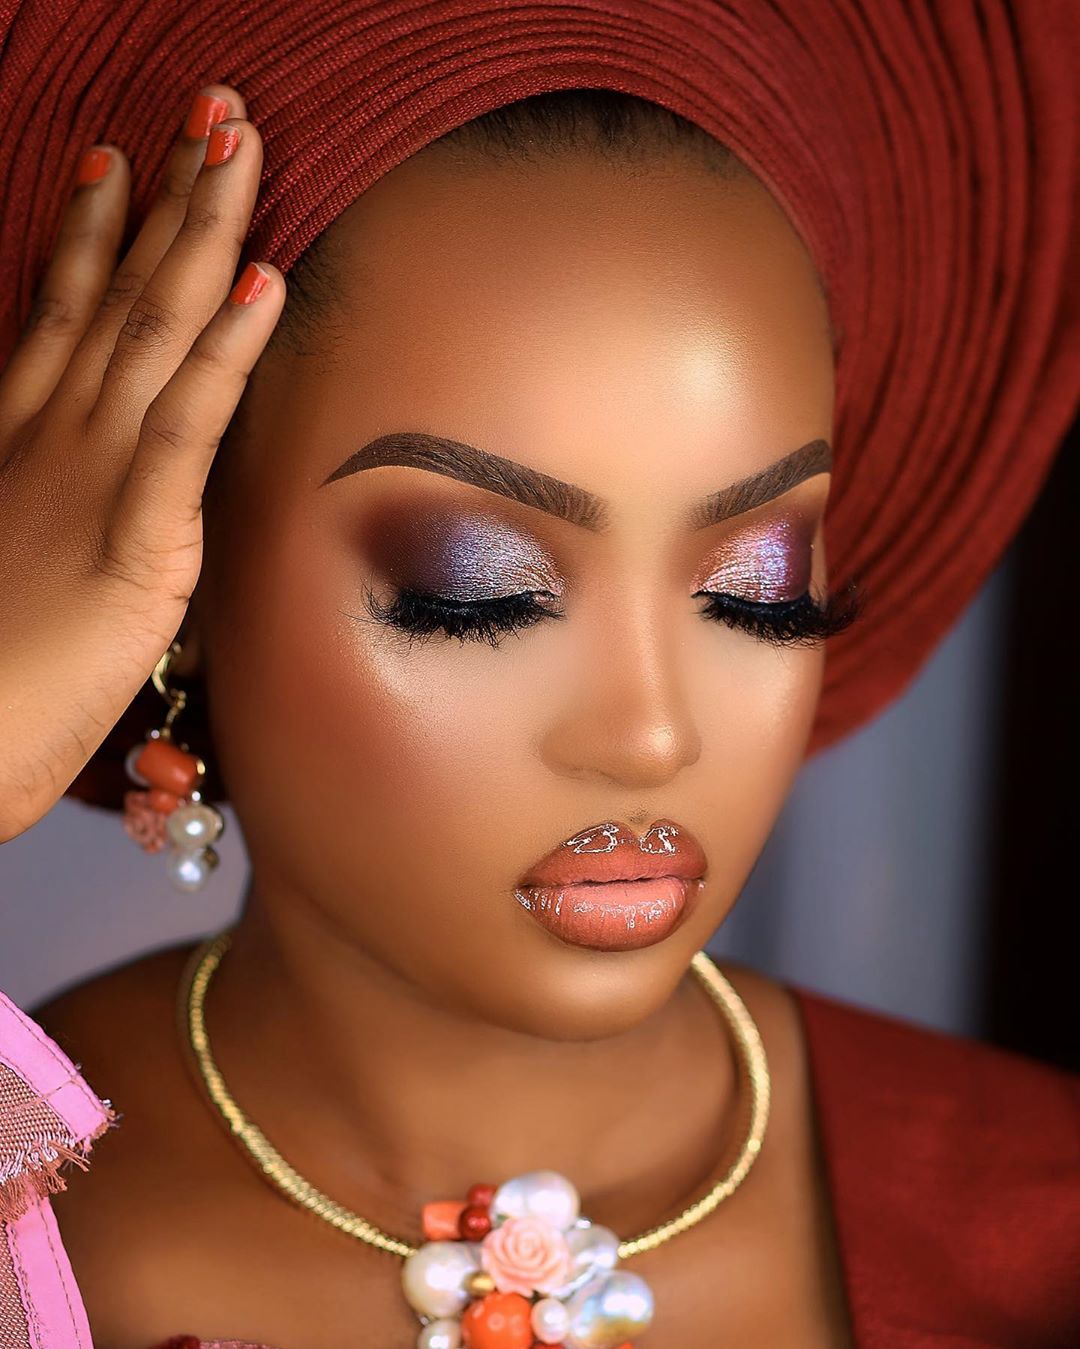 Yoruba Brides-to-be, Don’t Sleep on This Traditional Beauty Look ...